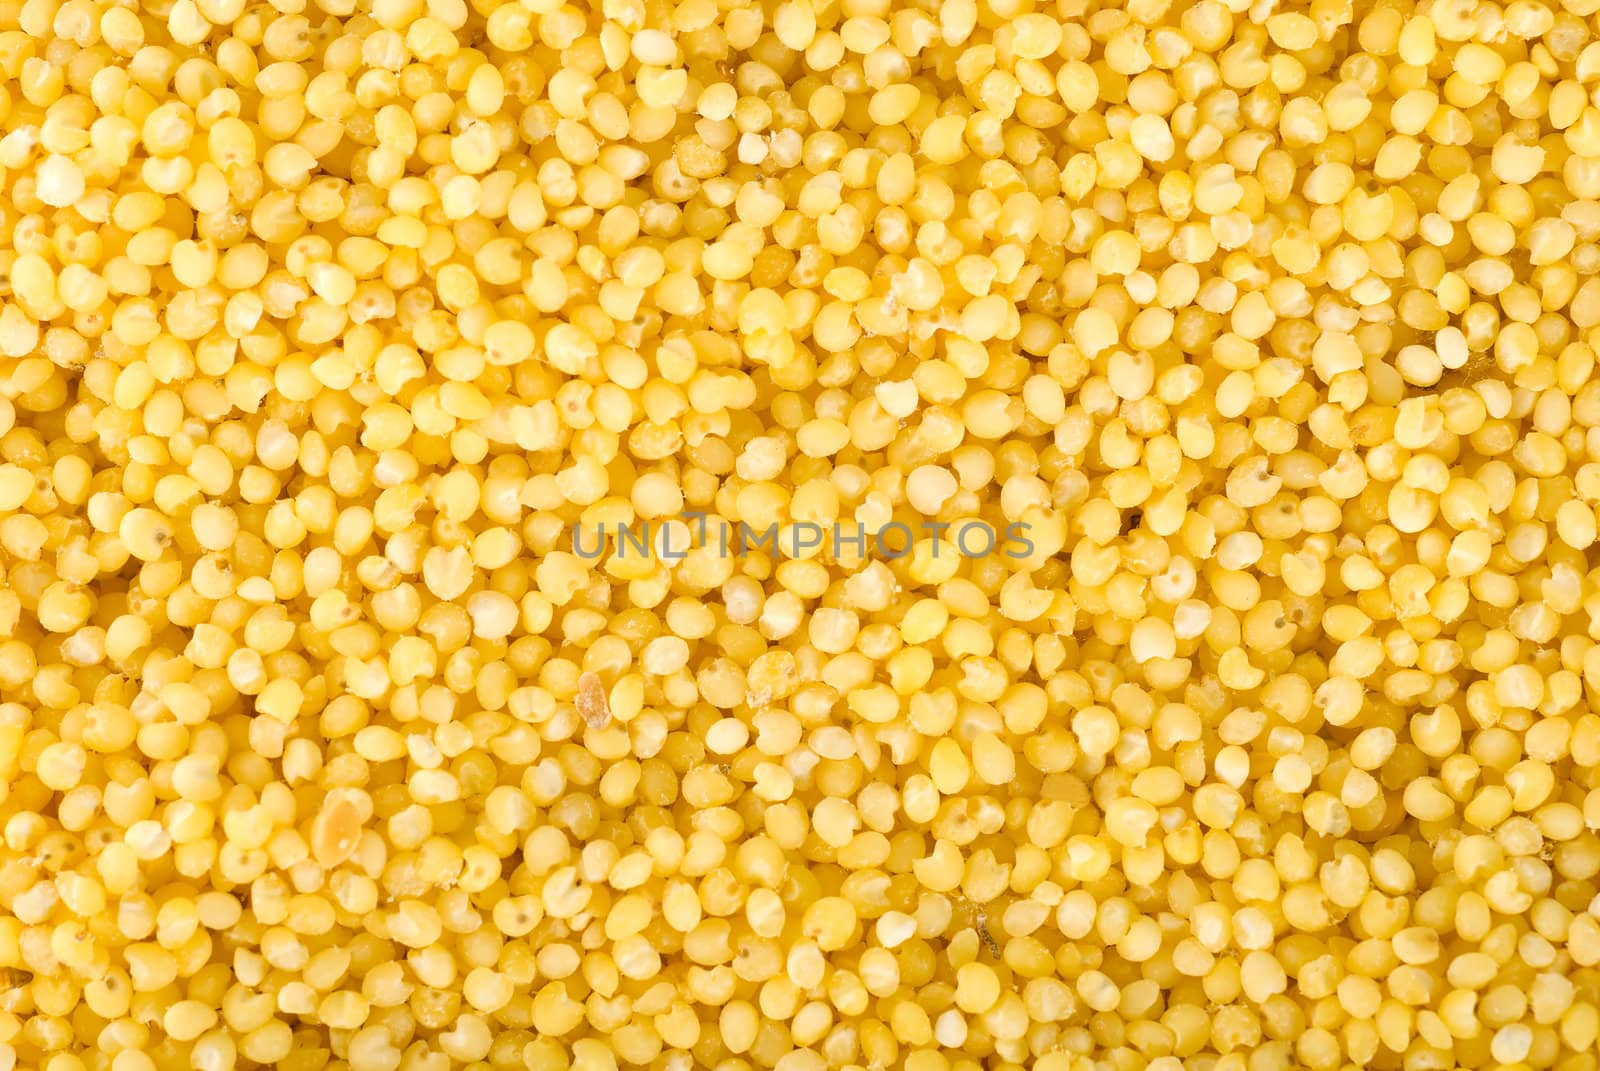 Millet seed cereal yellow backgrounds texture dry